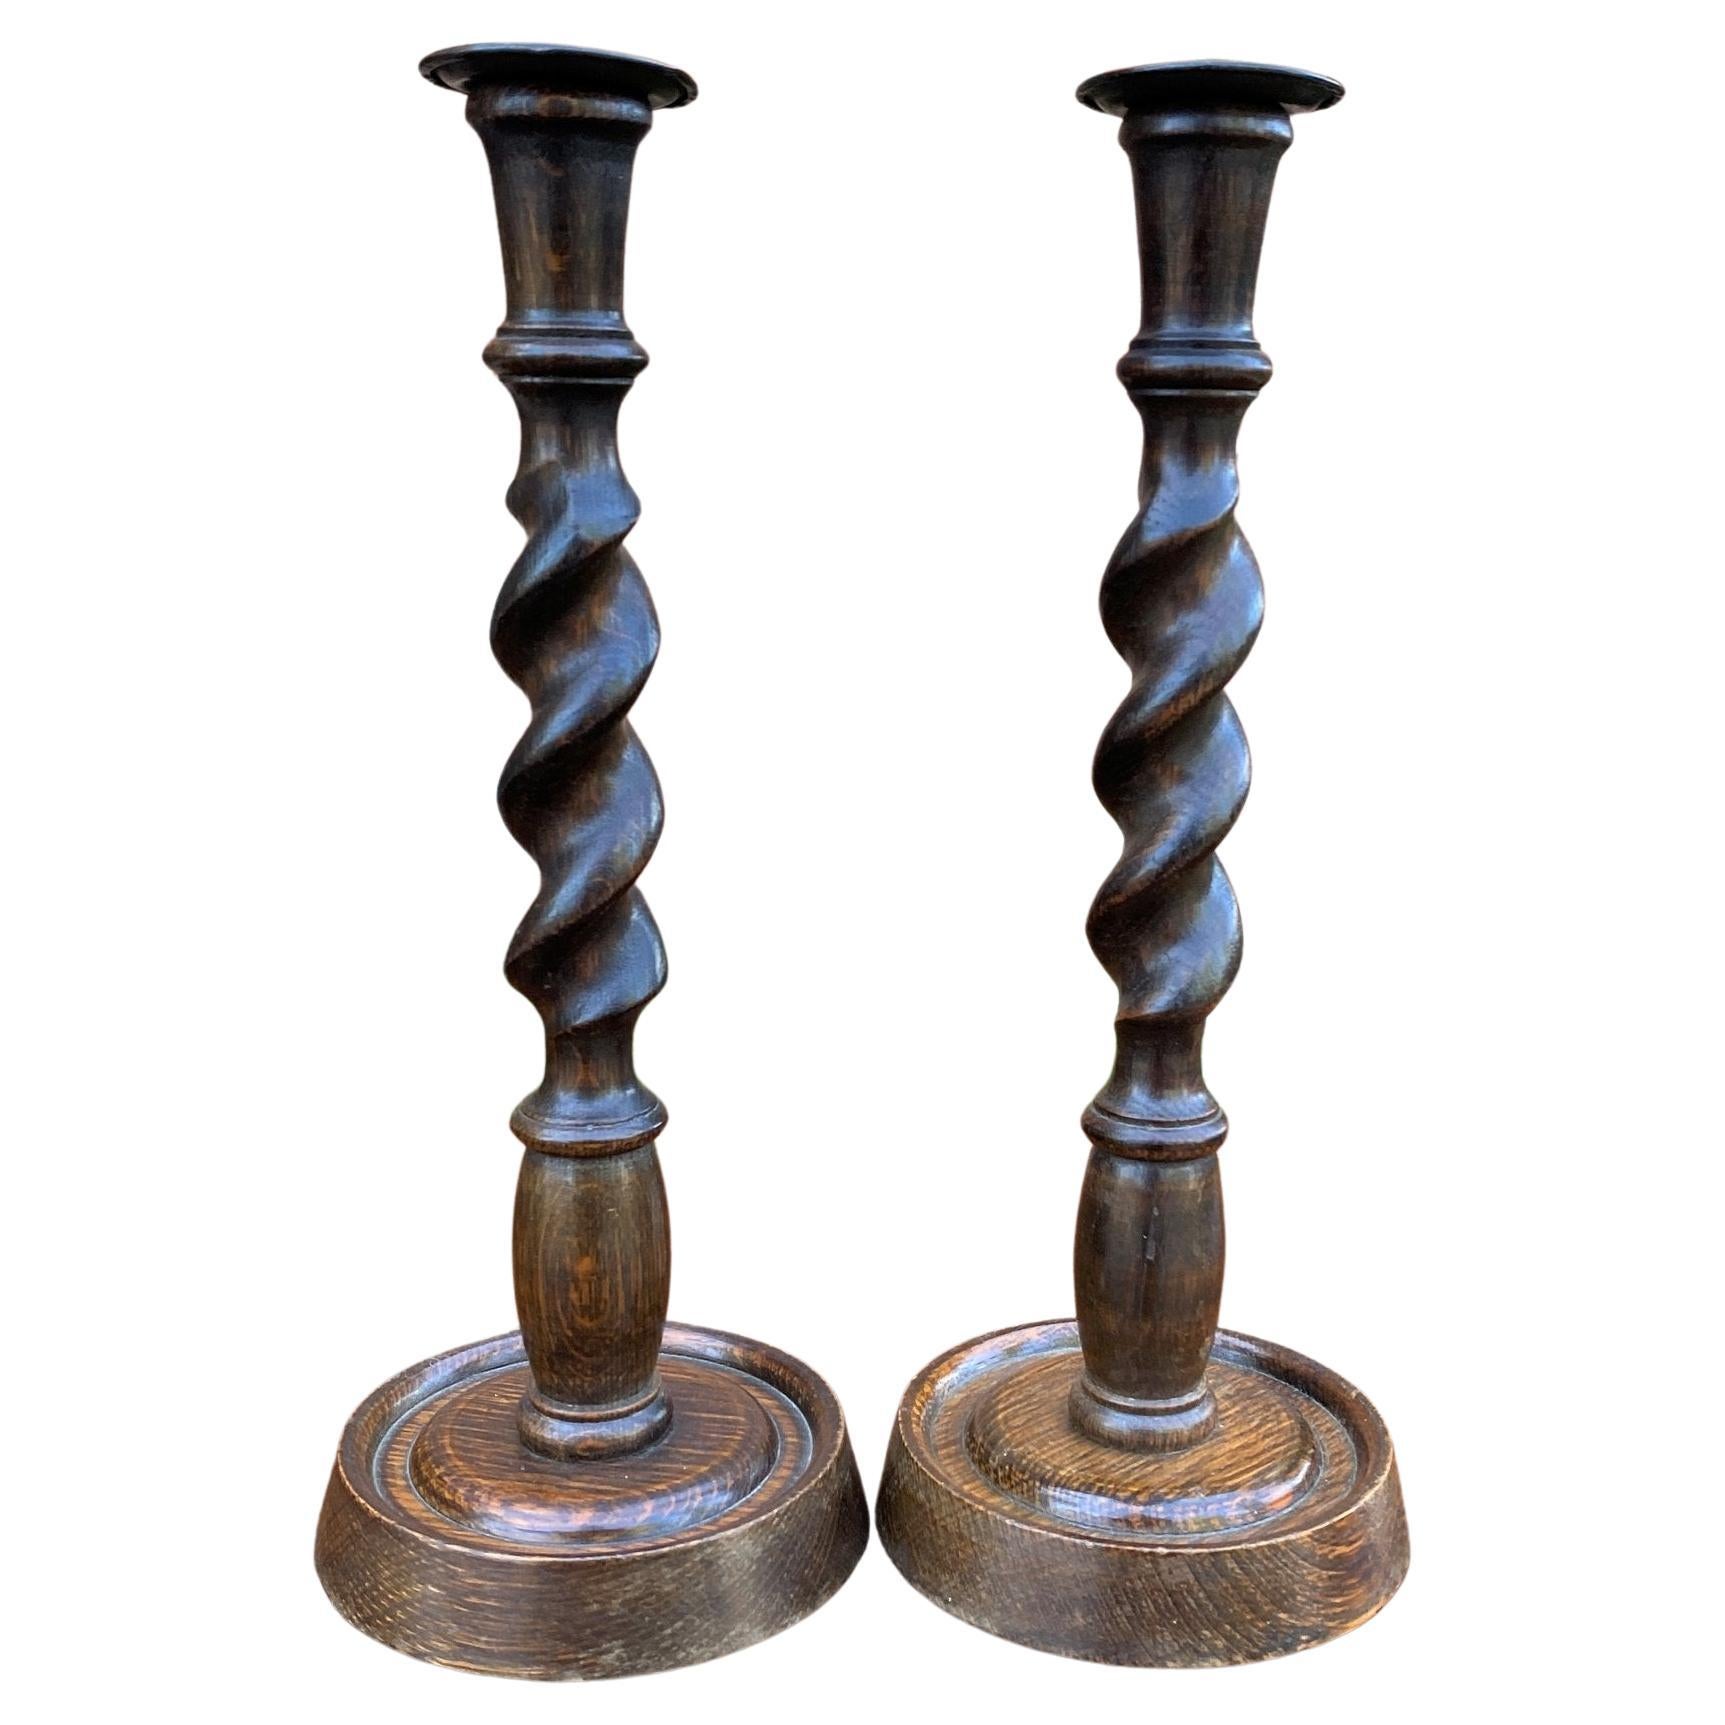 Antique English Candlesticks Candle Holders Tall Barley Twist Oak Pair